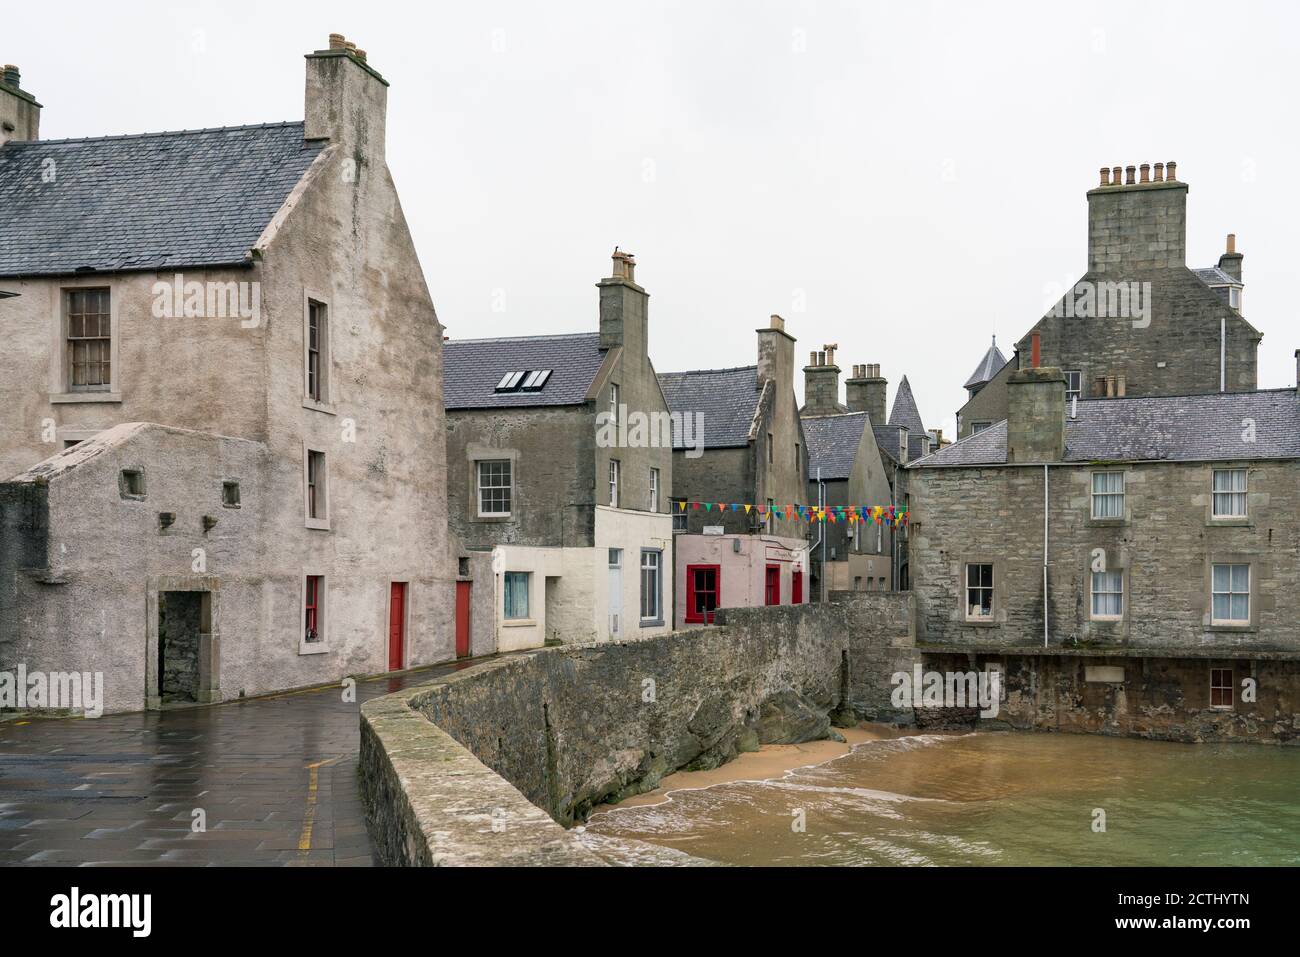 View of old buildings  on Commercial Street  in old town of Lerwick, Shetland Isles, Scotland, UK Stock Photo